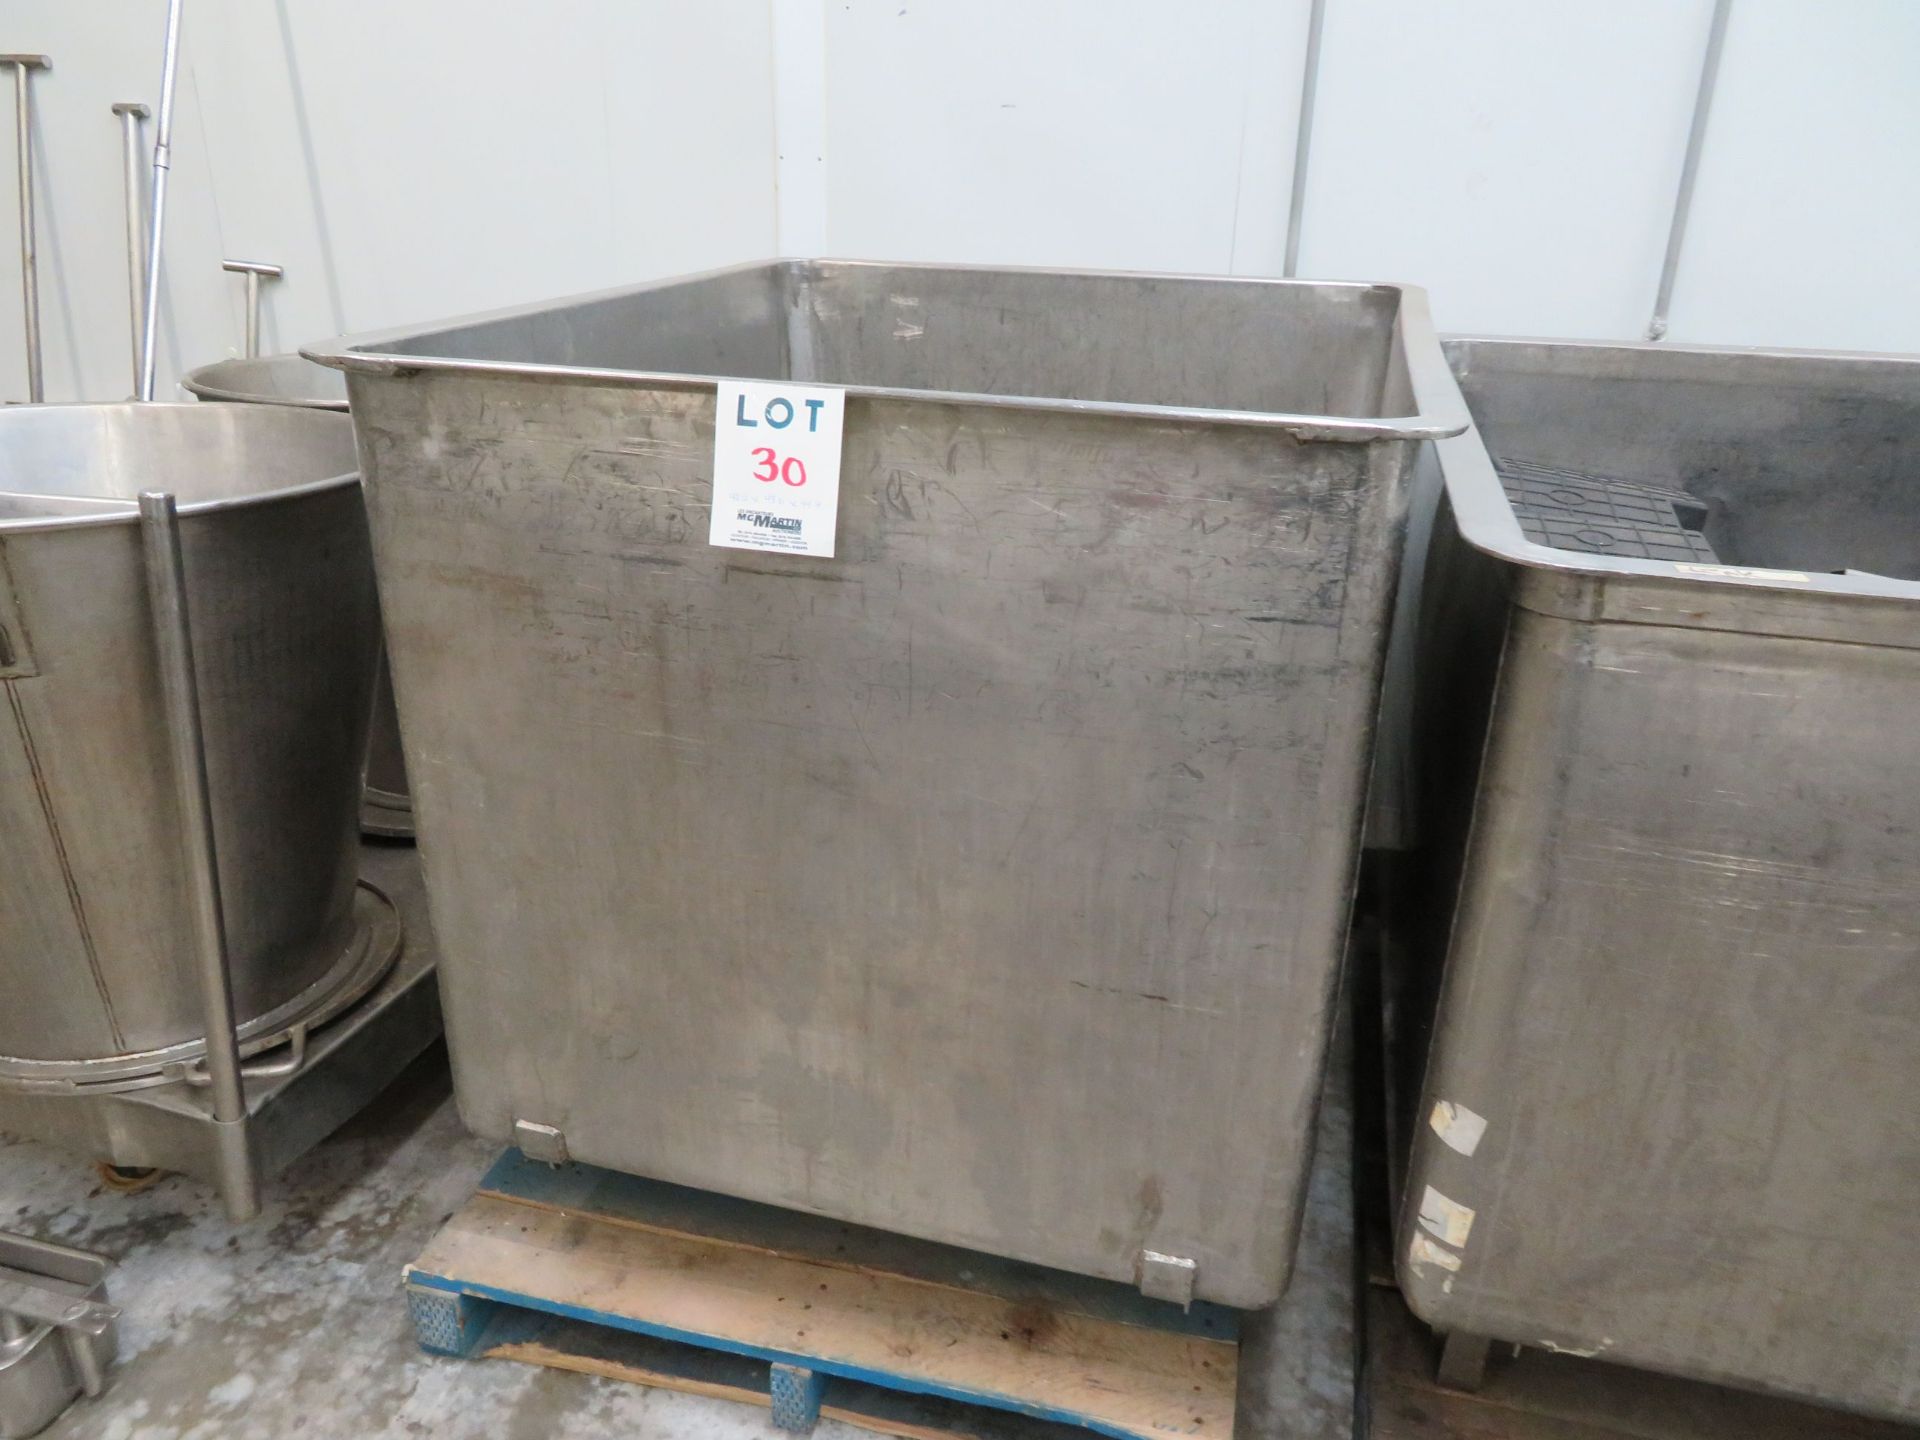 Stainless steel tub approx. 42"w x 48'd x 44"h